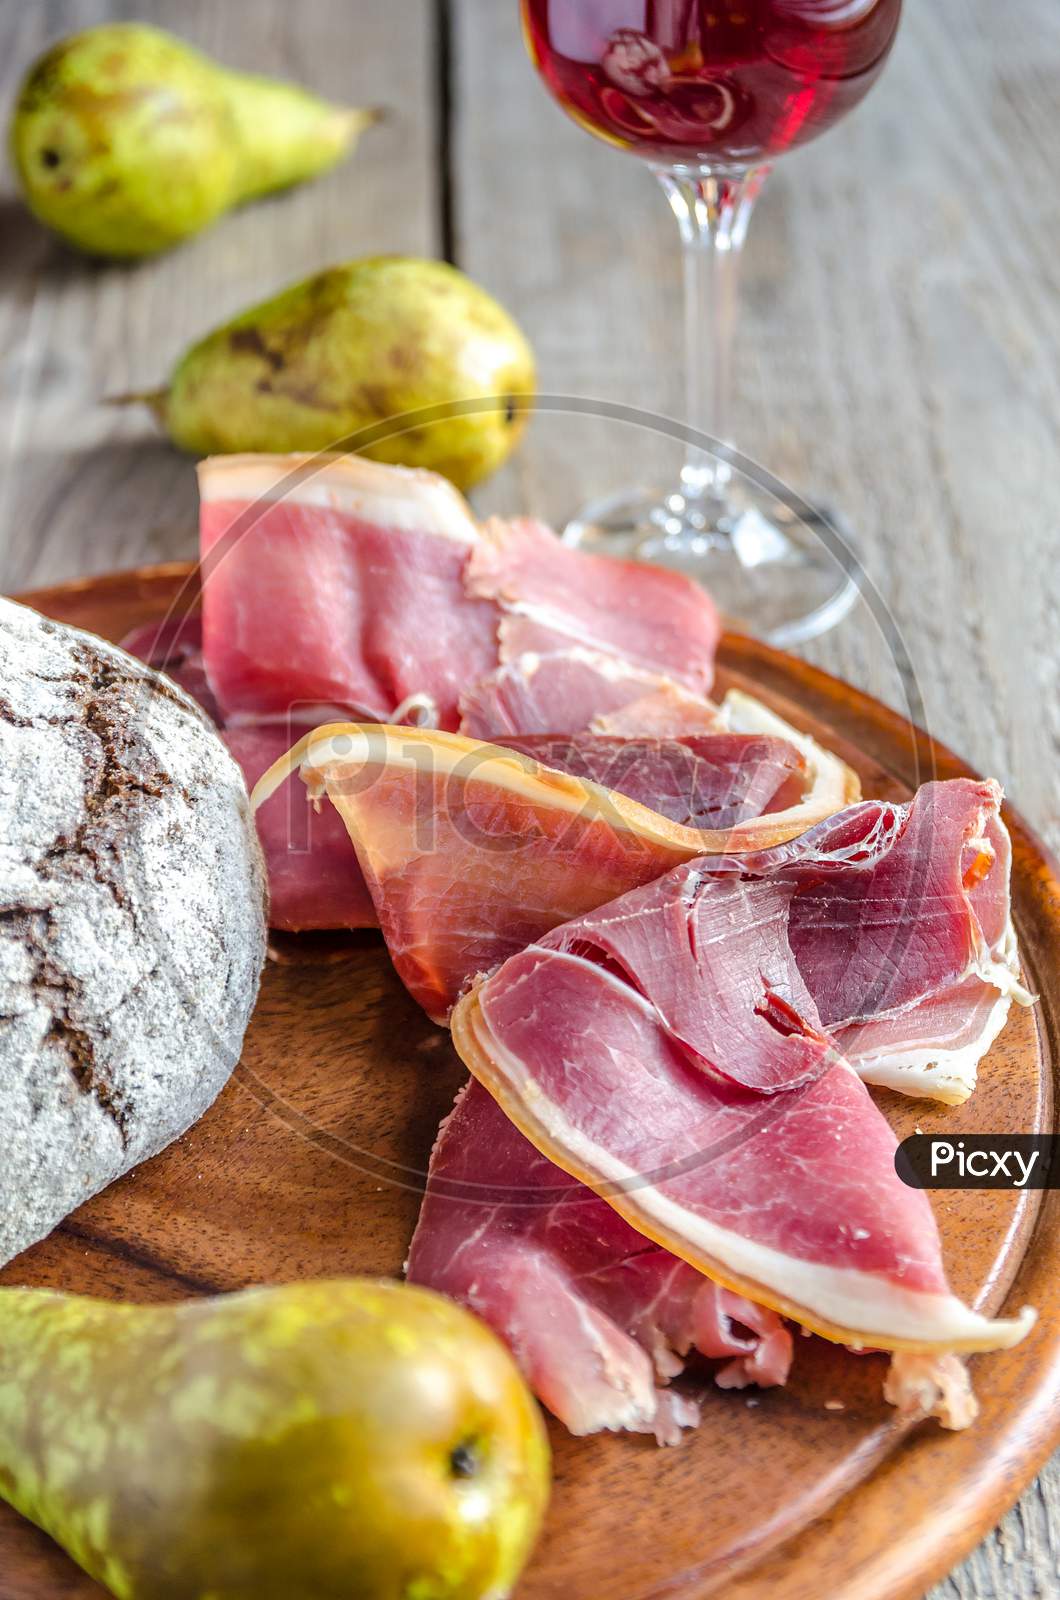 Slices of italian ham on the wooden board